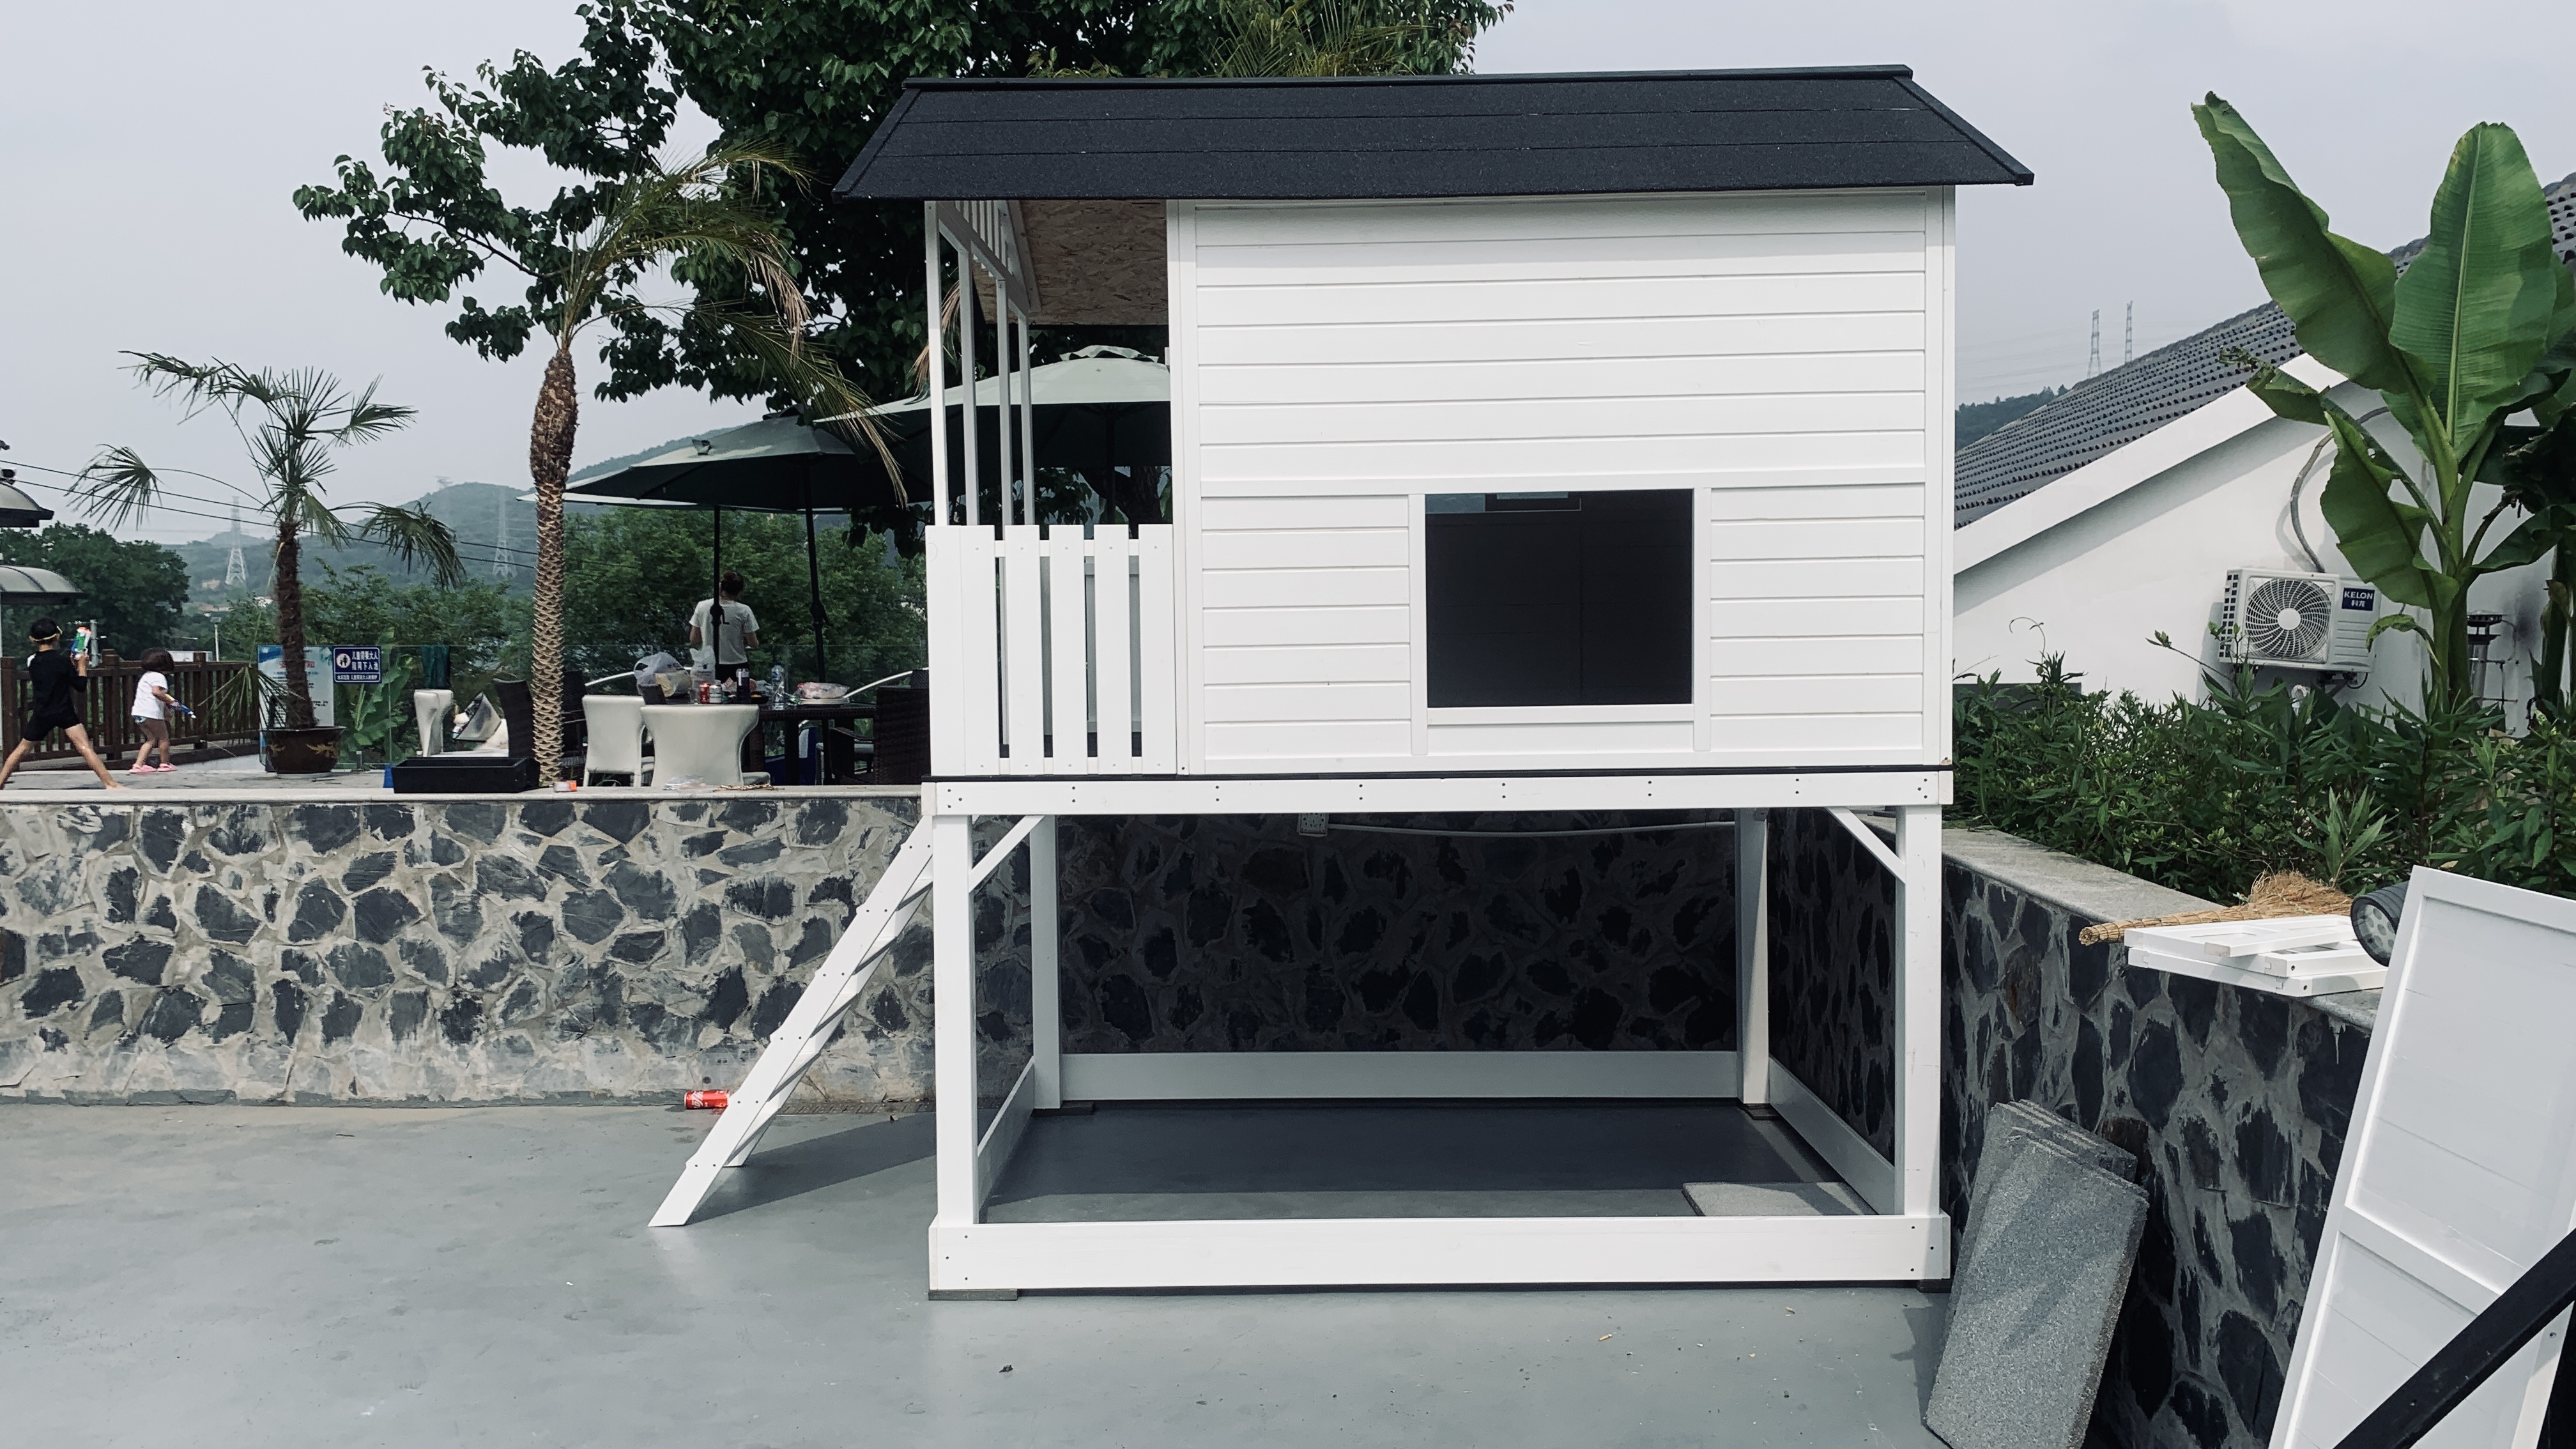 Why choose water-based paint on the surface of the playhouse?